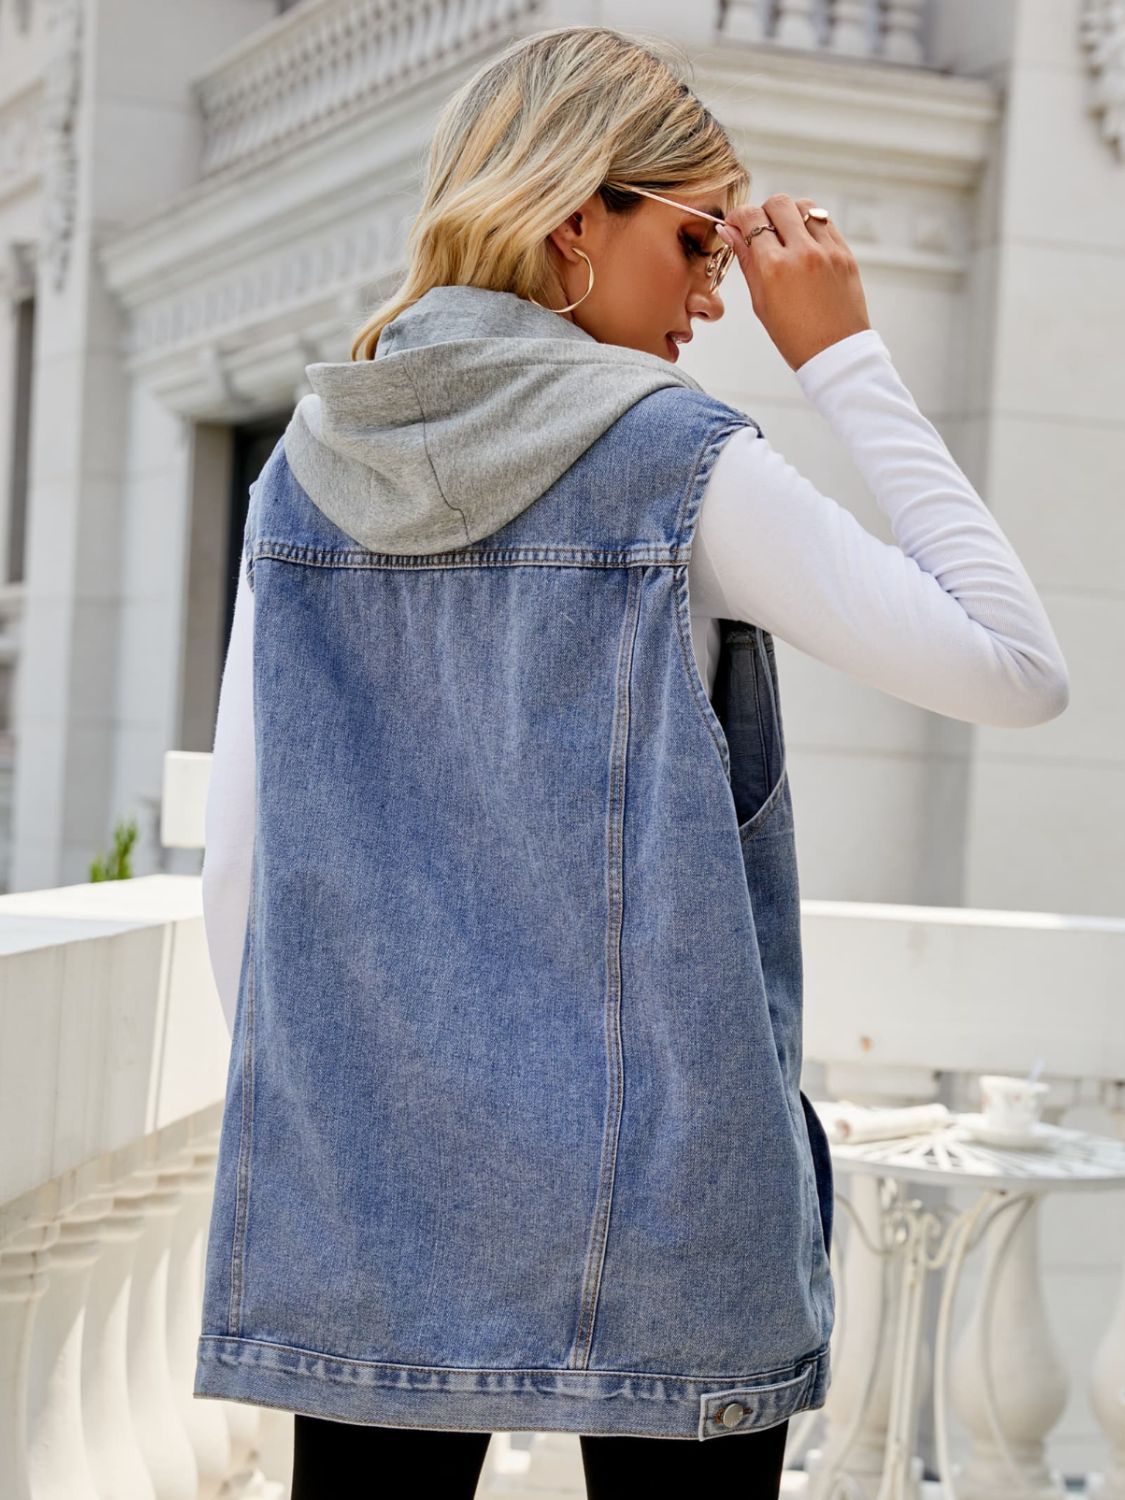 Gray Drawstring Hooded Sleeveless Denim Top with Pockets Sentient Beauty Fashions Apparel & Accessories